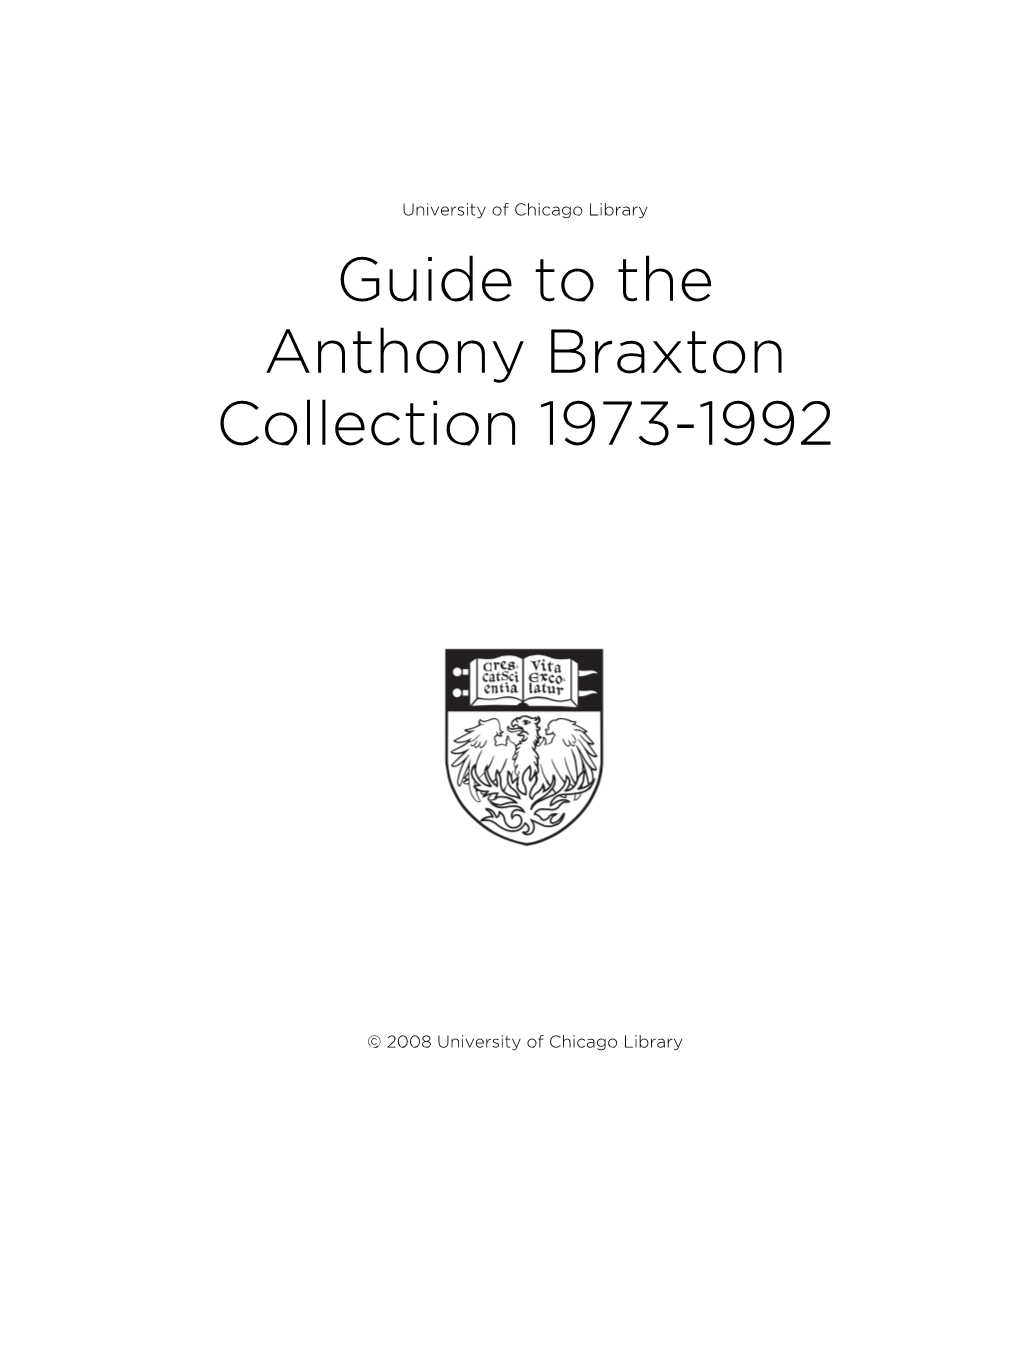 Guide to the Anthony Braxton Collection 1973-1992